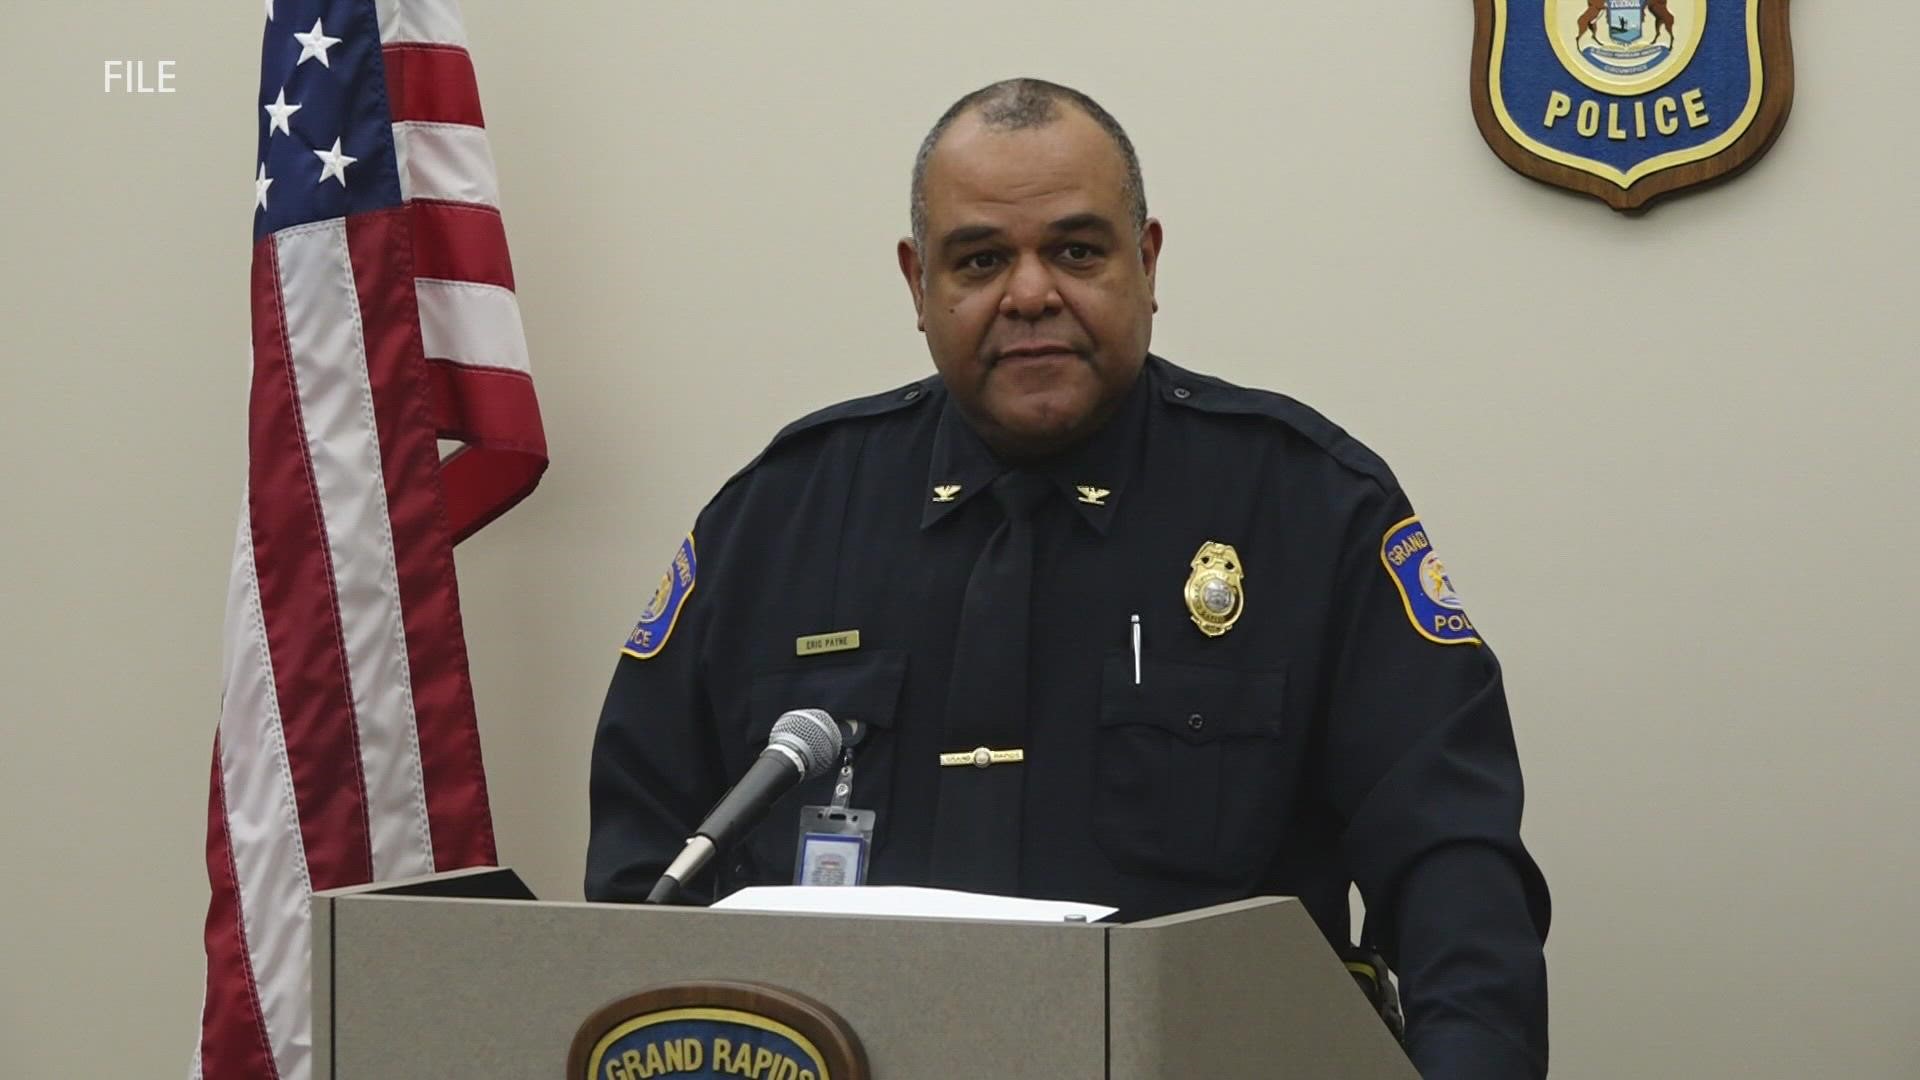 After three decades with the GRPD, Chief of Police Eric Payne announces his retirement in early 2022.